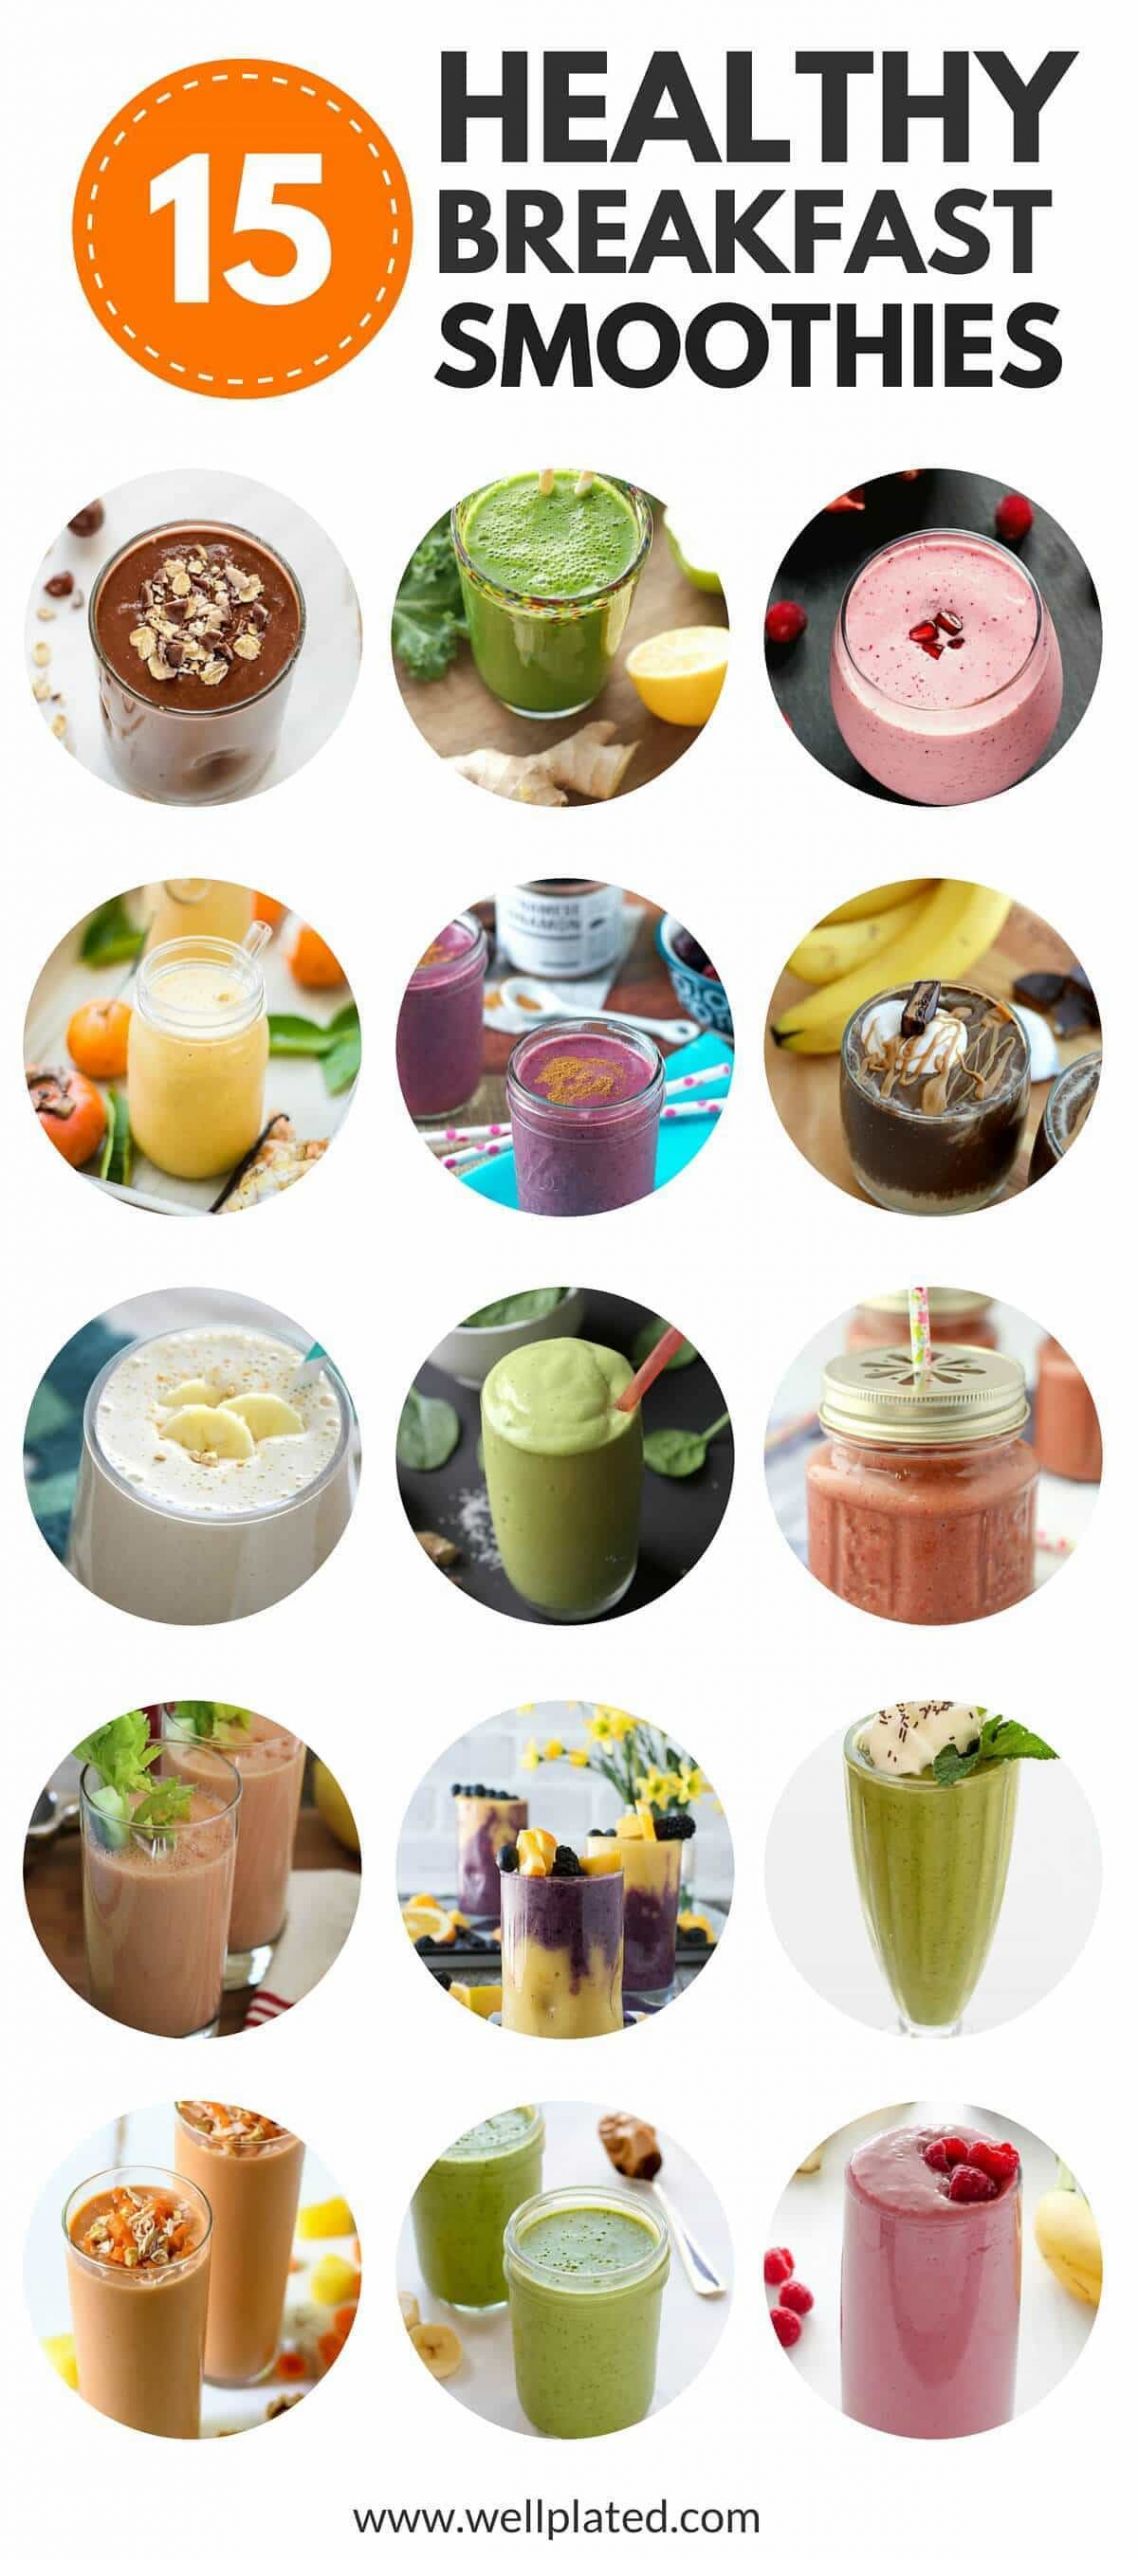 Breakfast Smoothies Healthy
 Healthy Breakfast Smoothies 20 of the Best Recipes